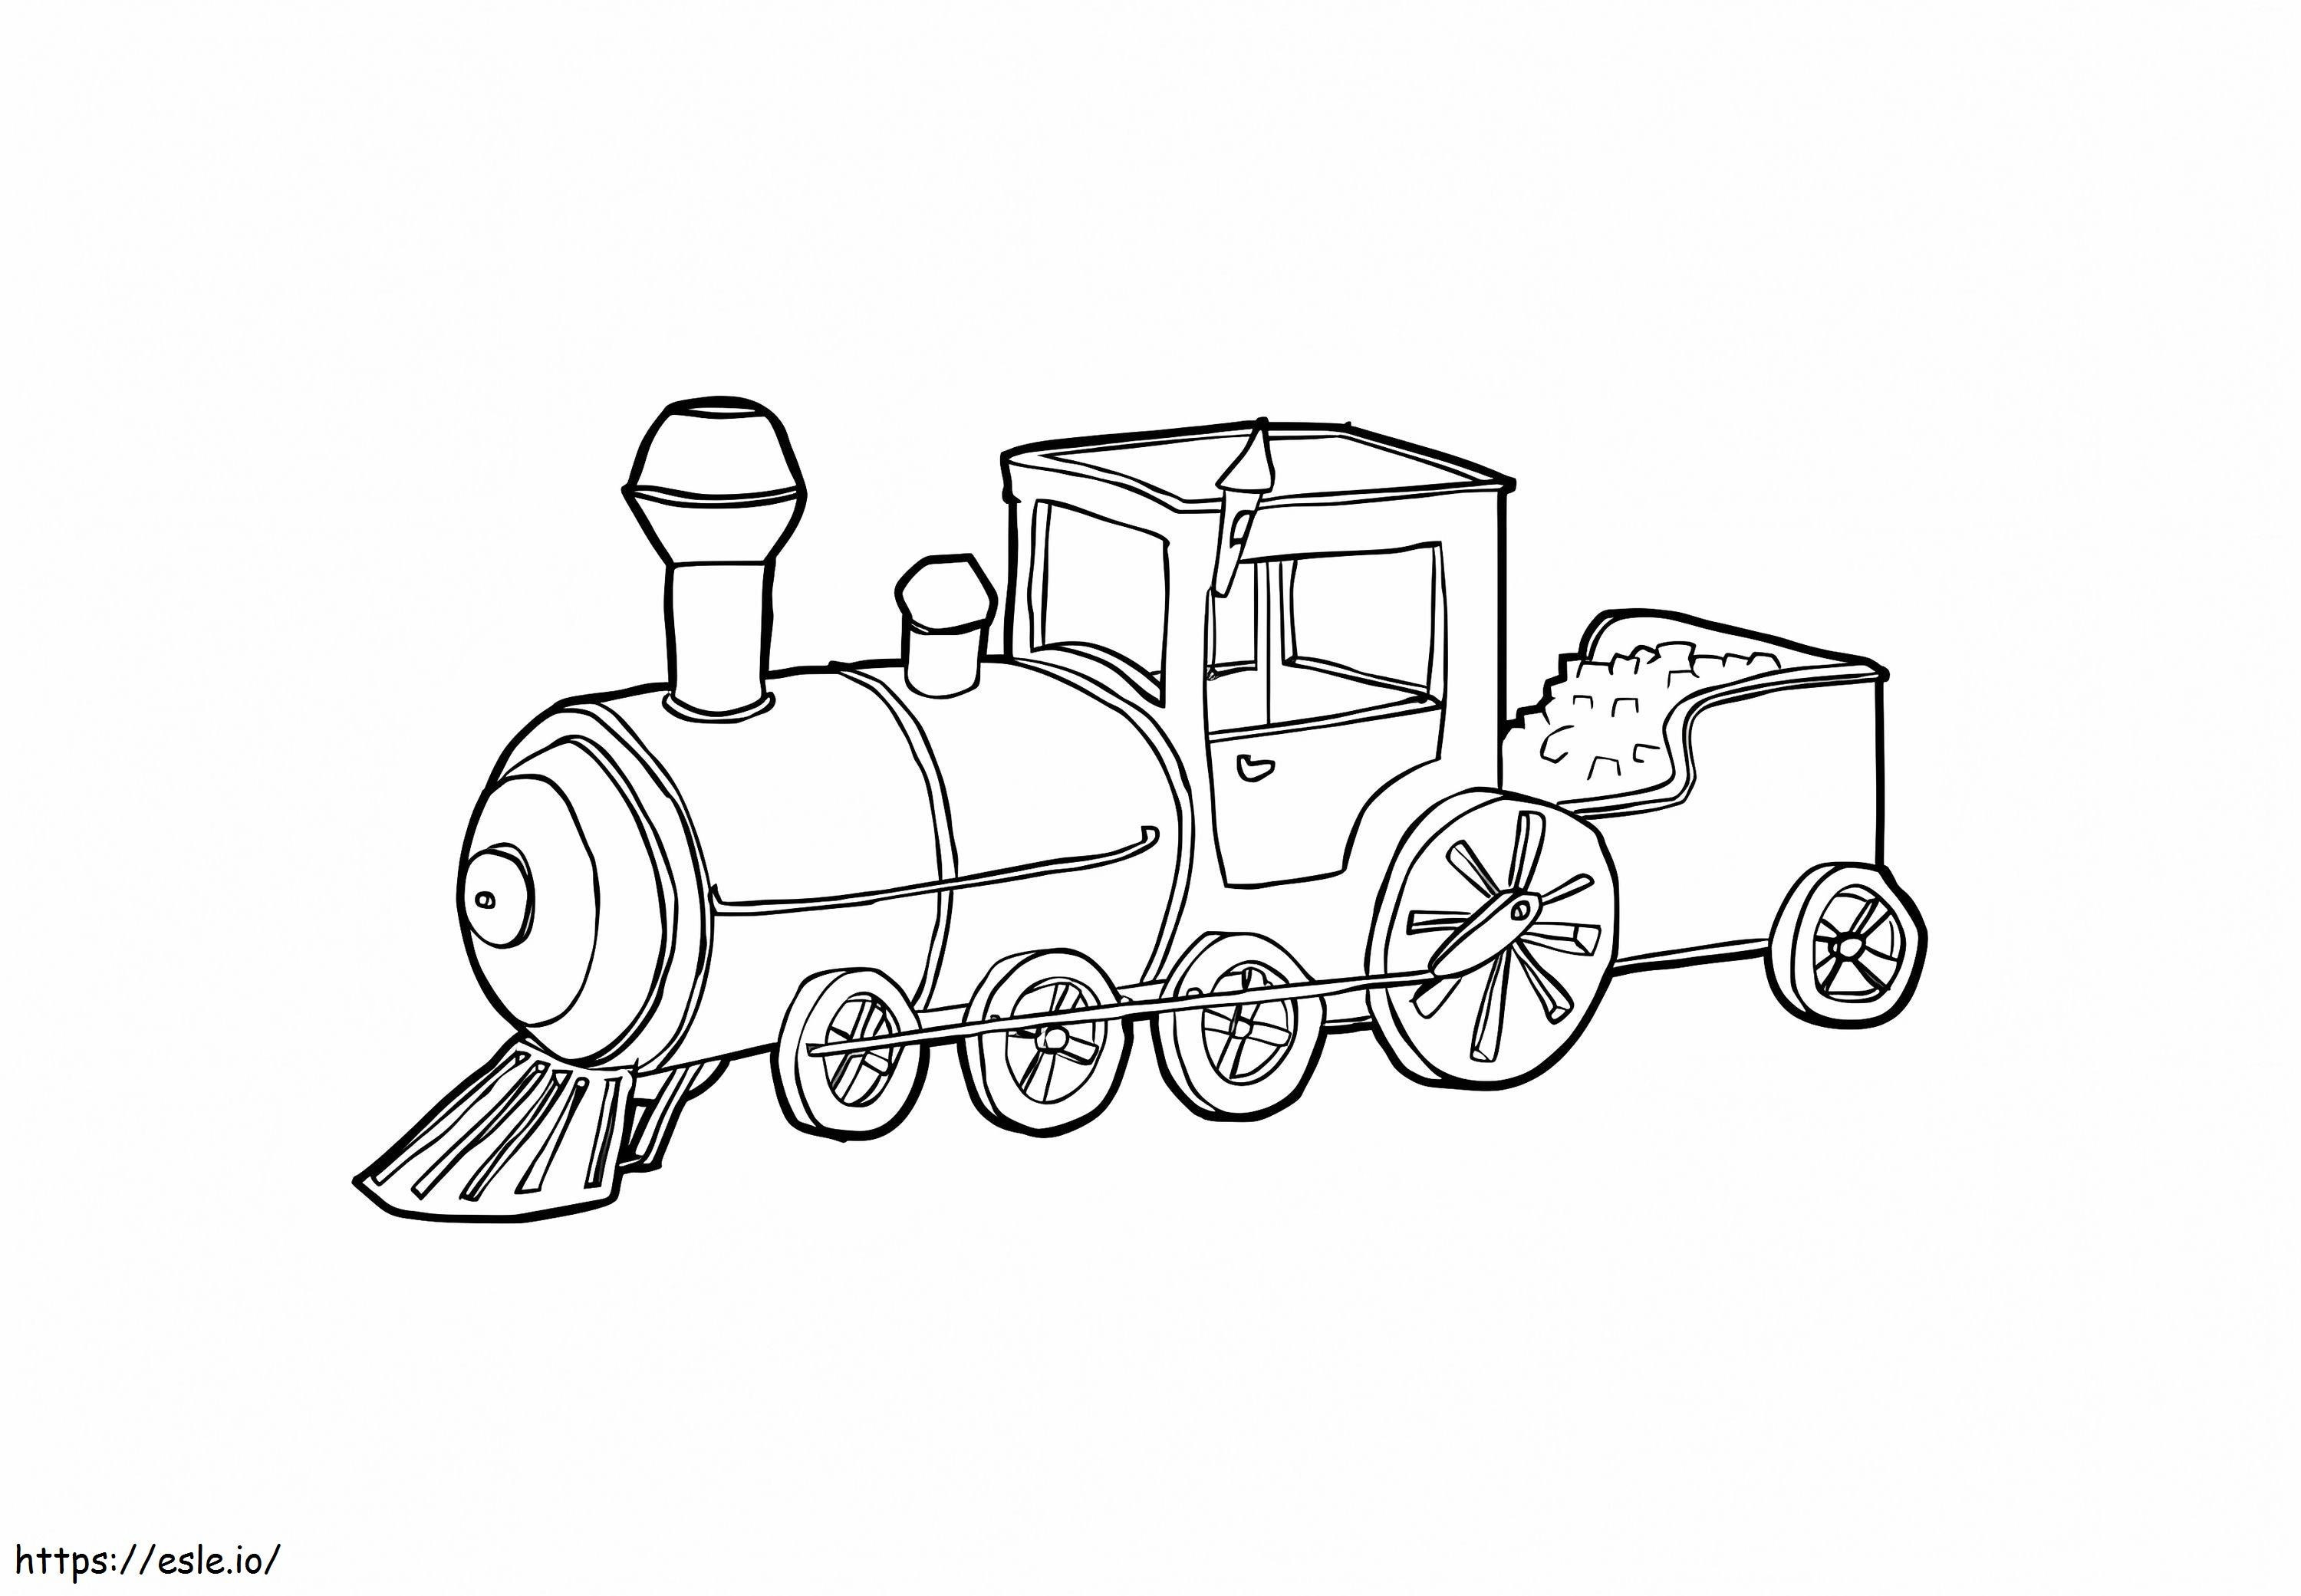 Train Engine coloring page